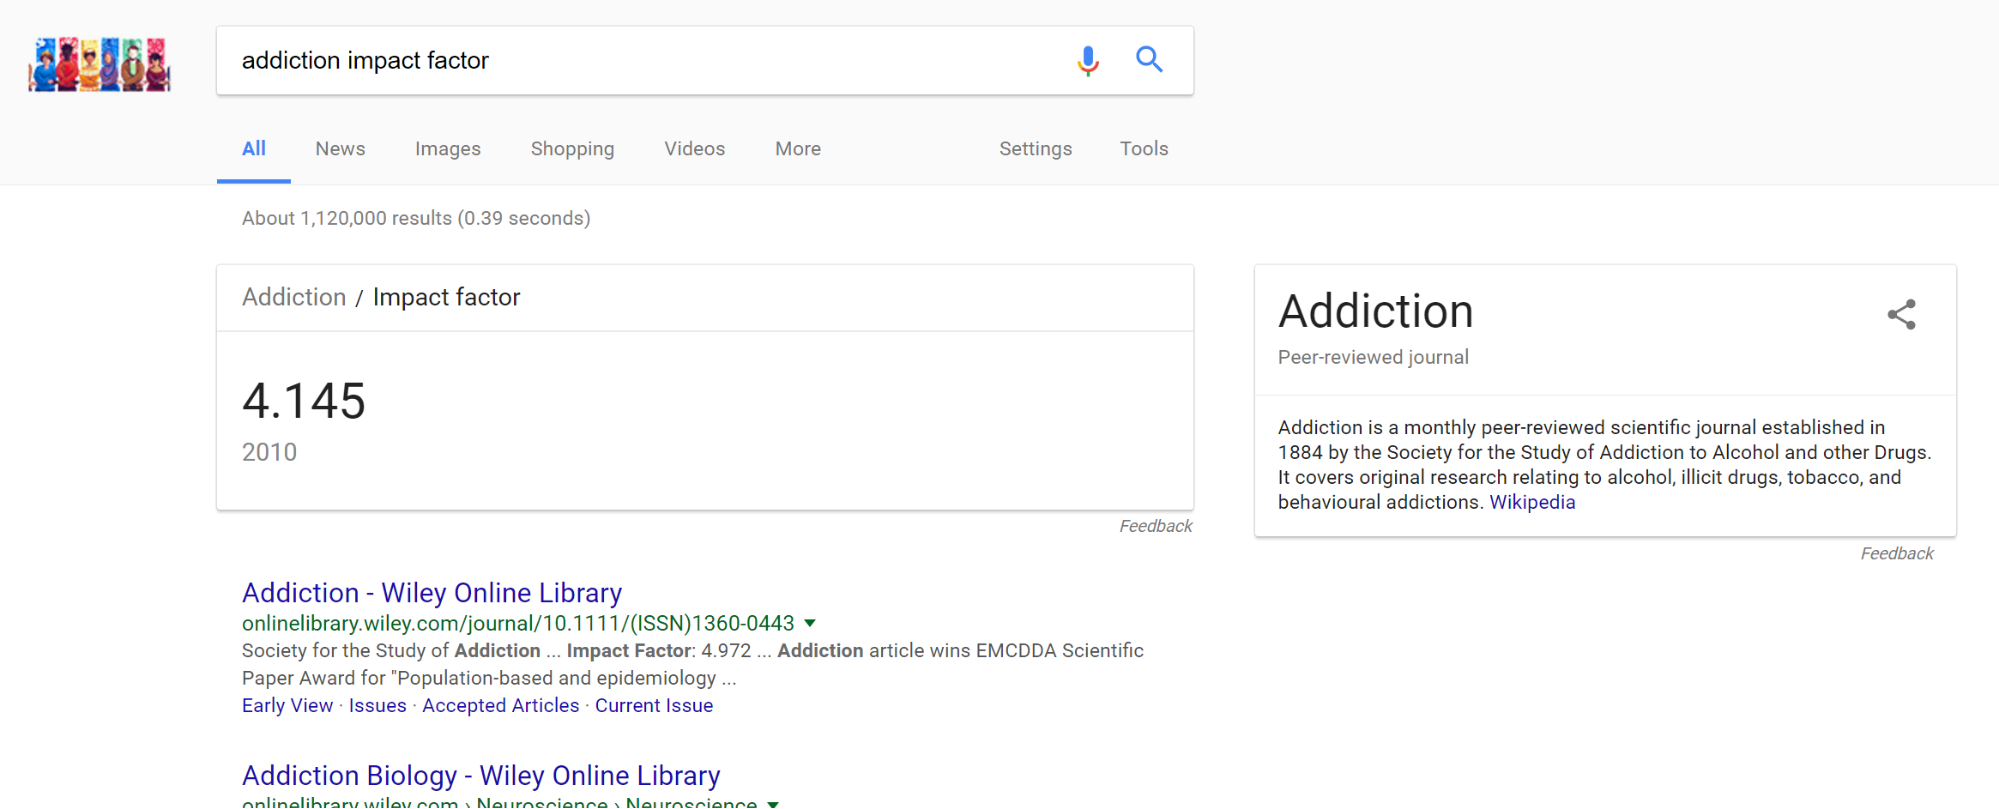 The Google search results for “addiction impact factor,” which we find in the knowledge panel to be 4.145 as of 2010.